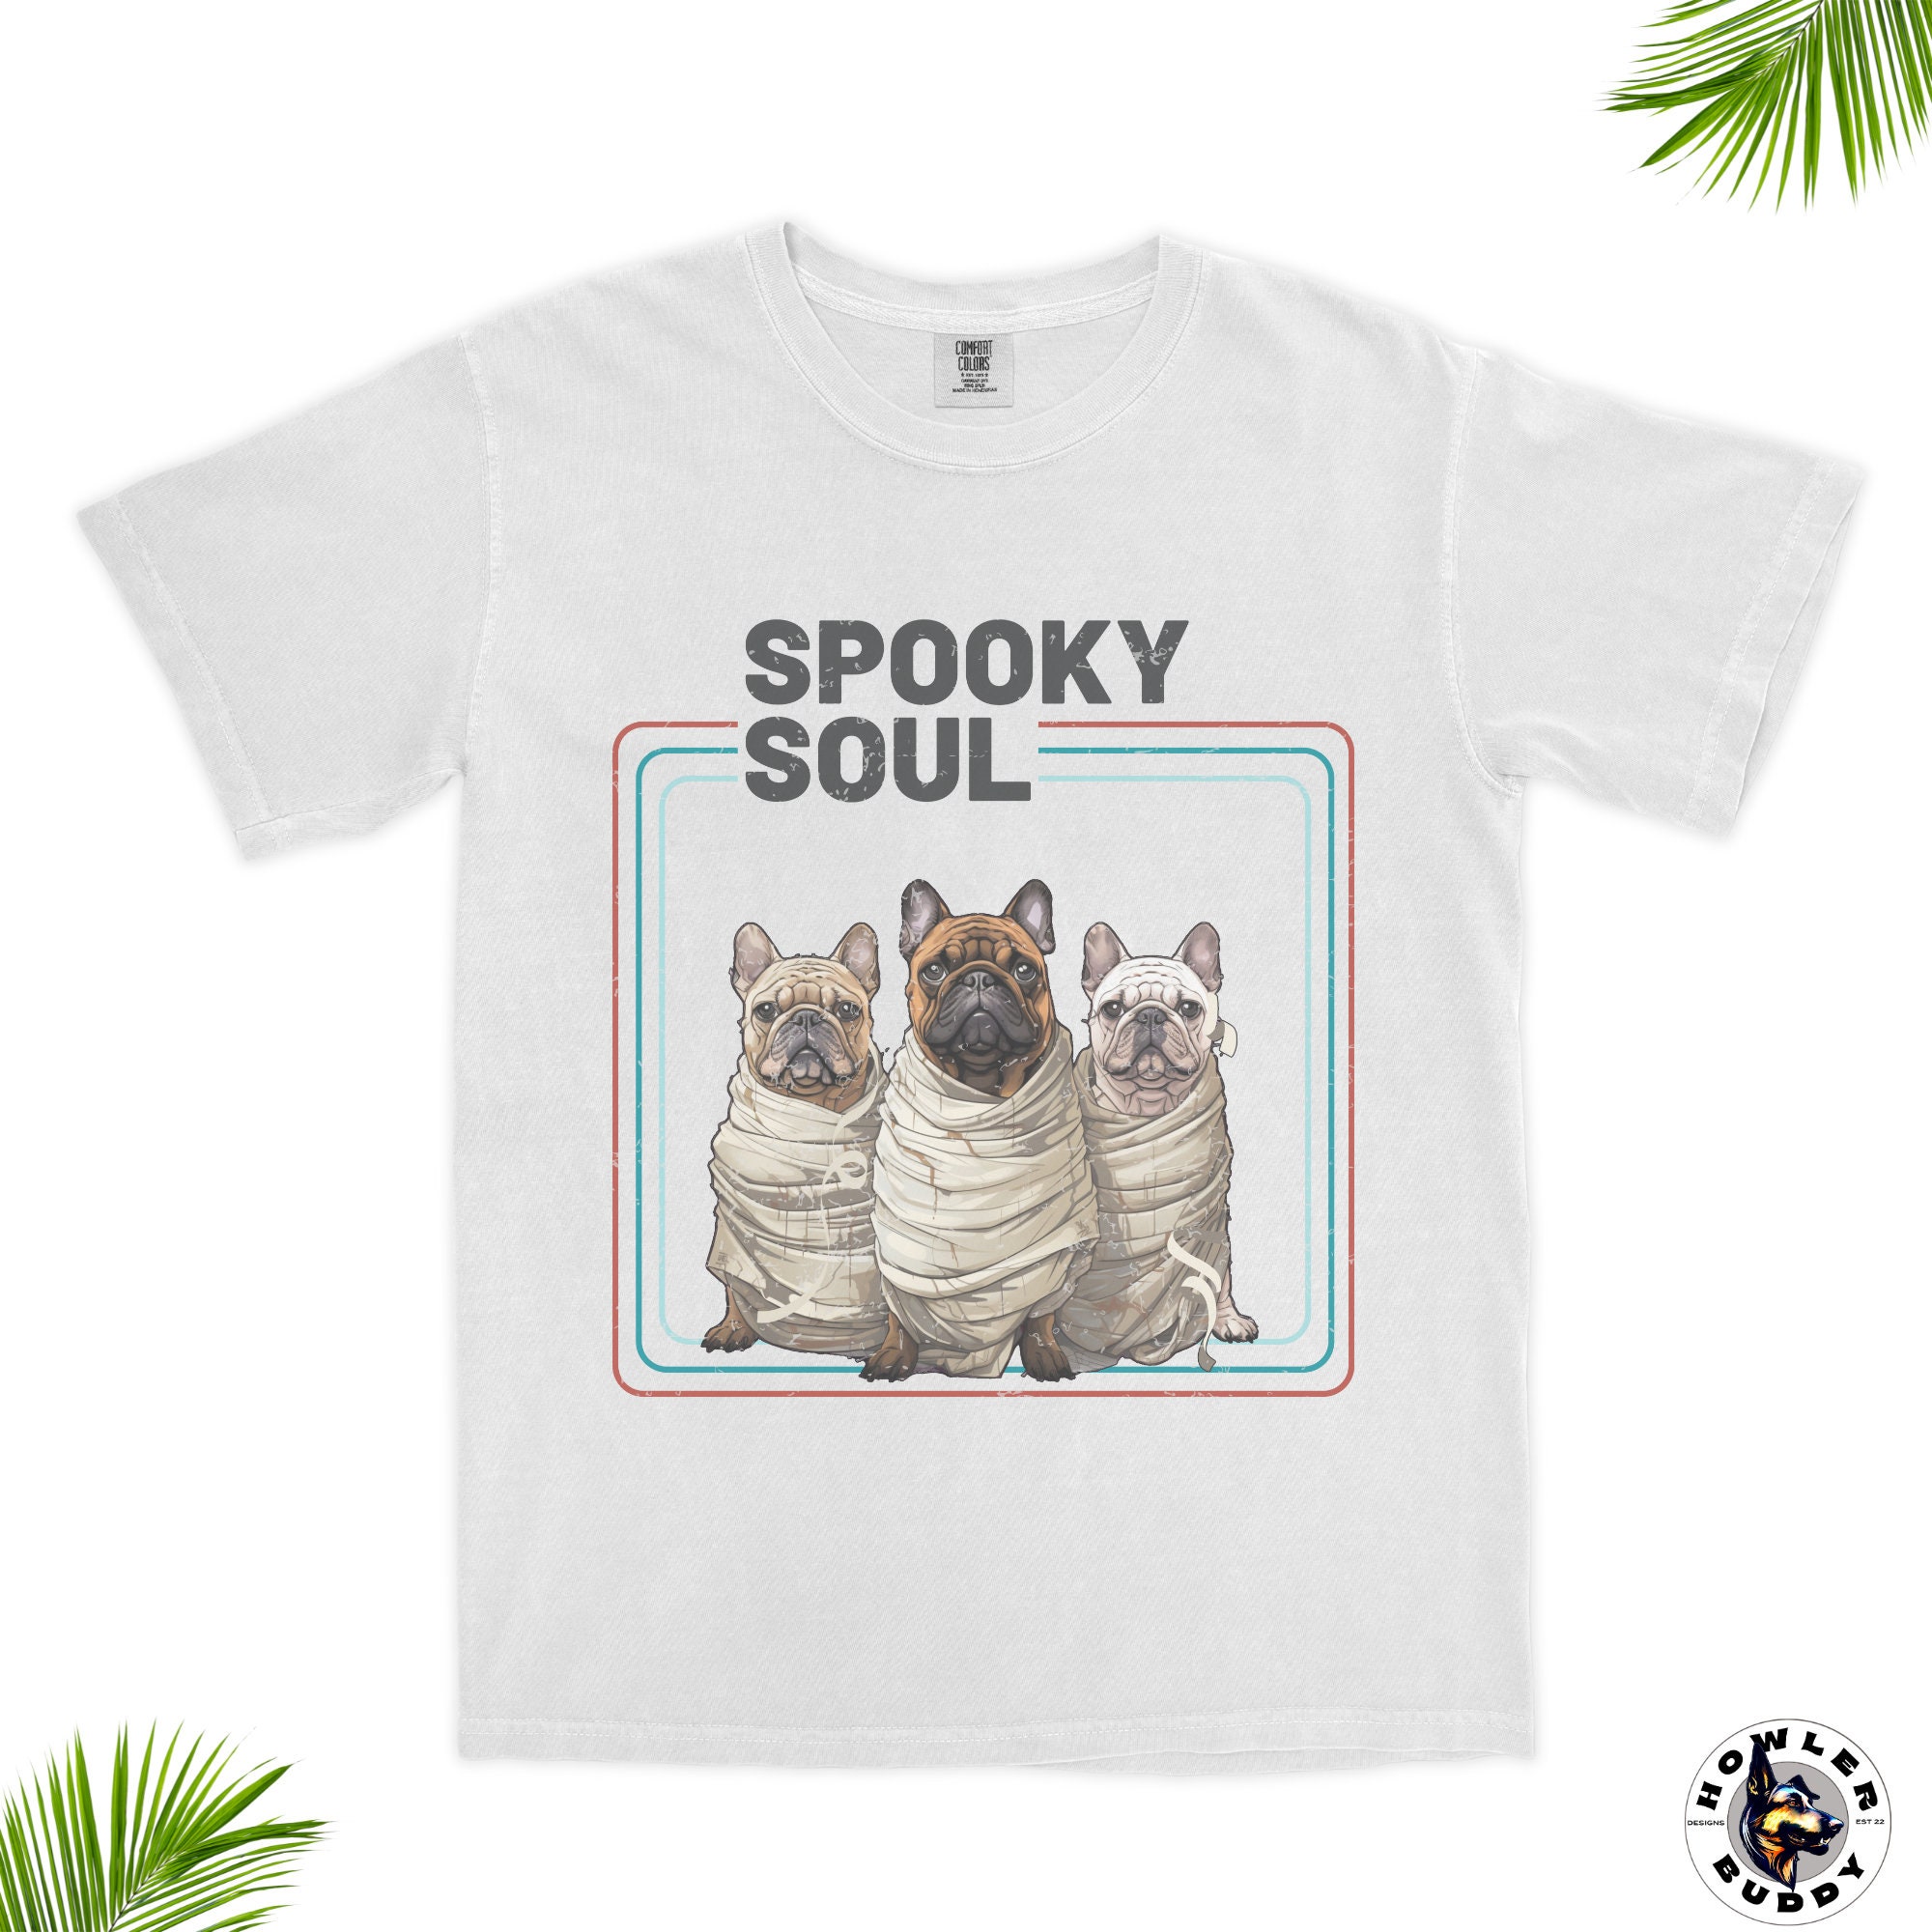 Discover Spooky Soul of a Frenchie : Retro Mummy Halloween Unisex Shirt - The Perfect Gift for French Bulldog Lovers and Fans - Frenchy Mom